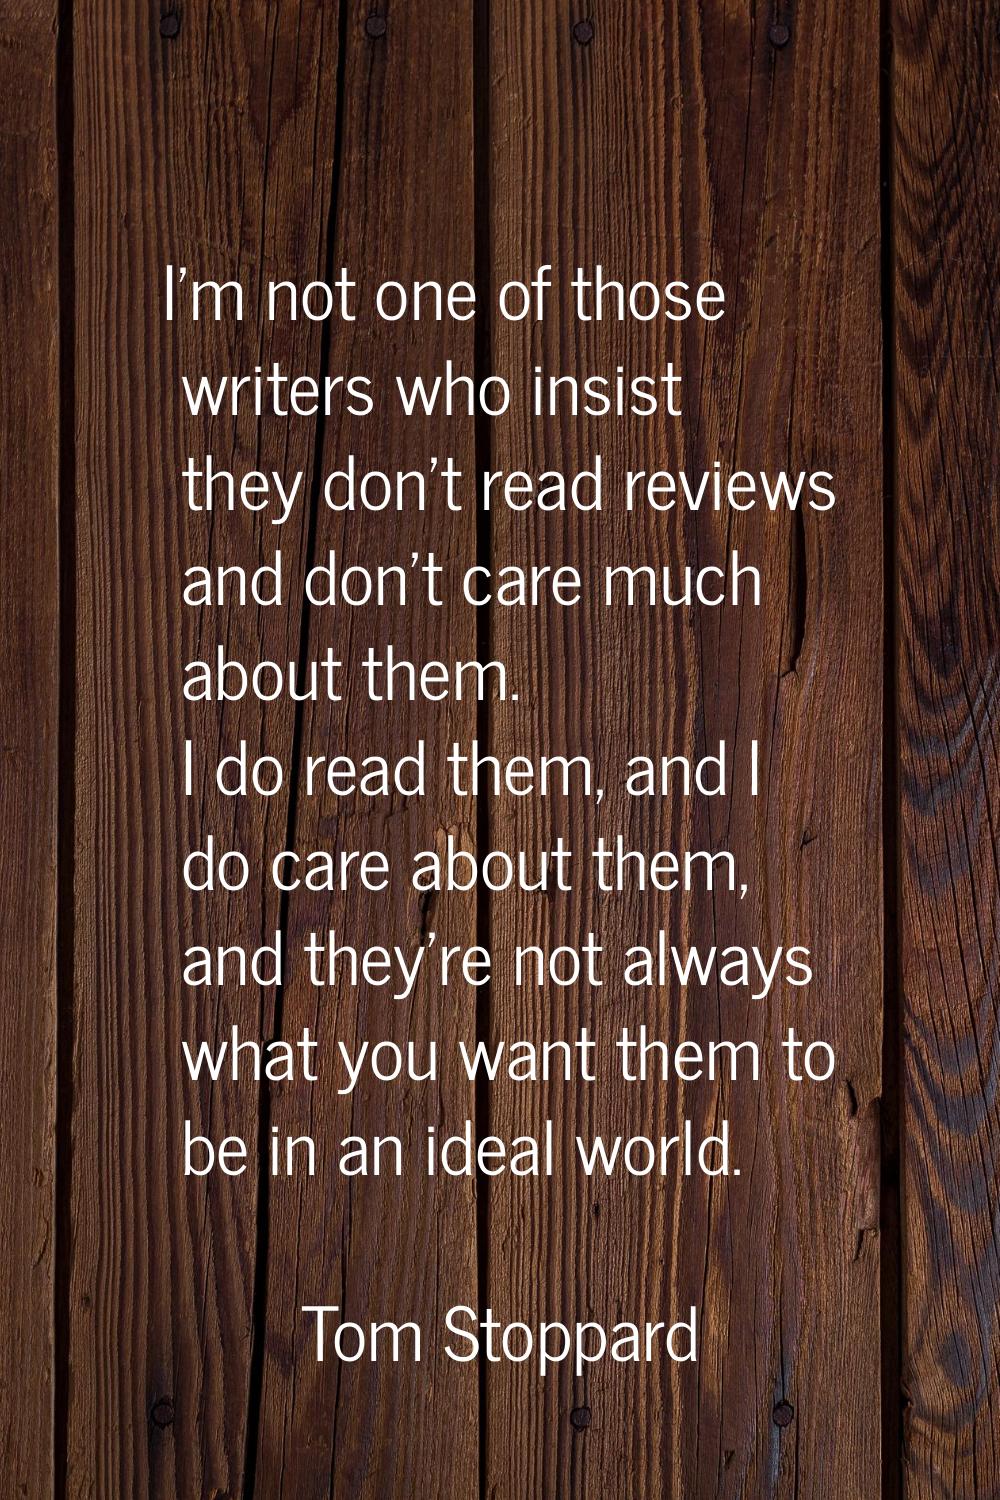 I'm not one of those writers who insist they don't read reviews and don't care much about them. I d